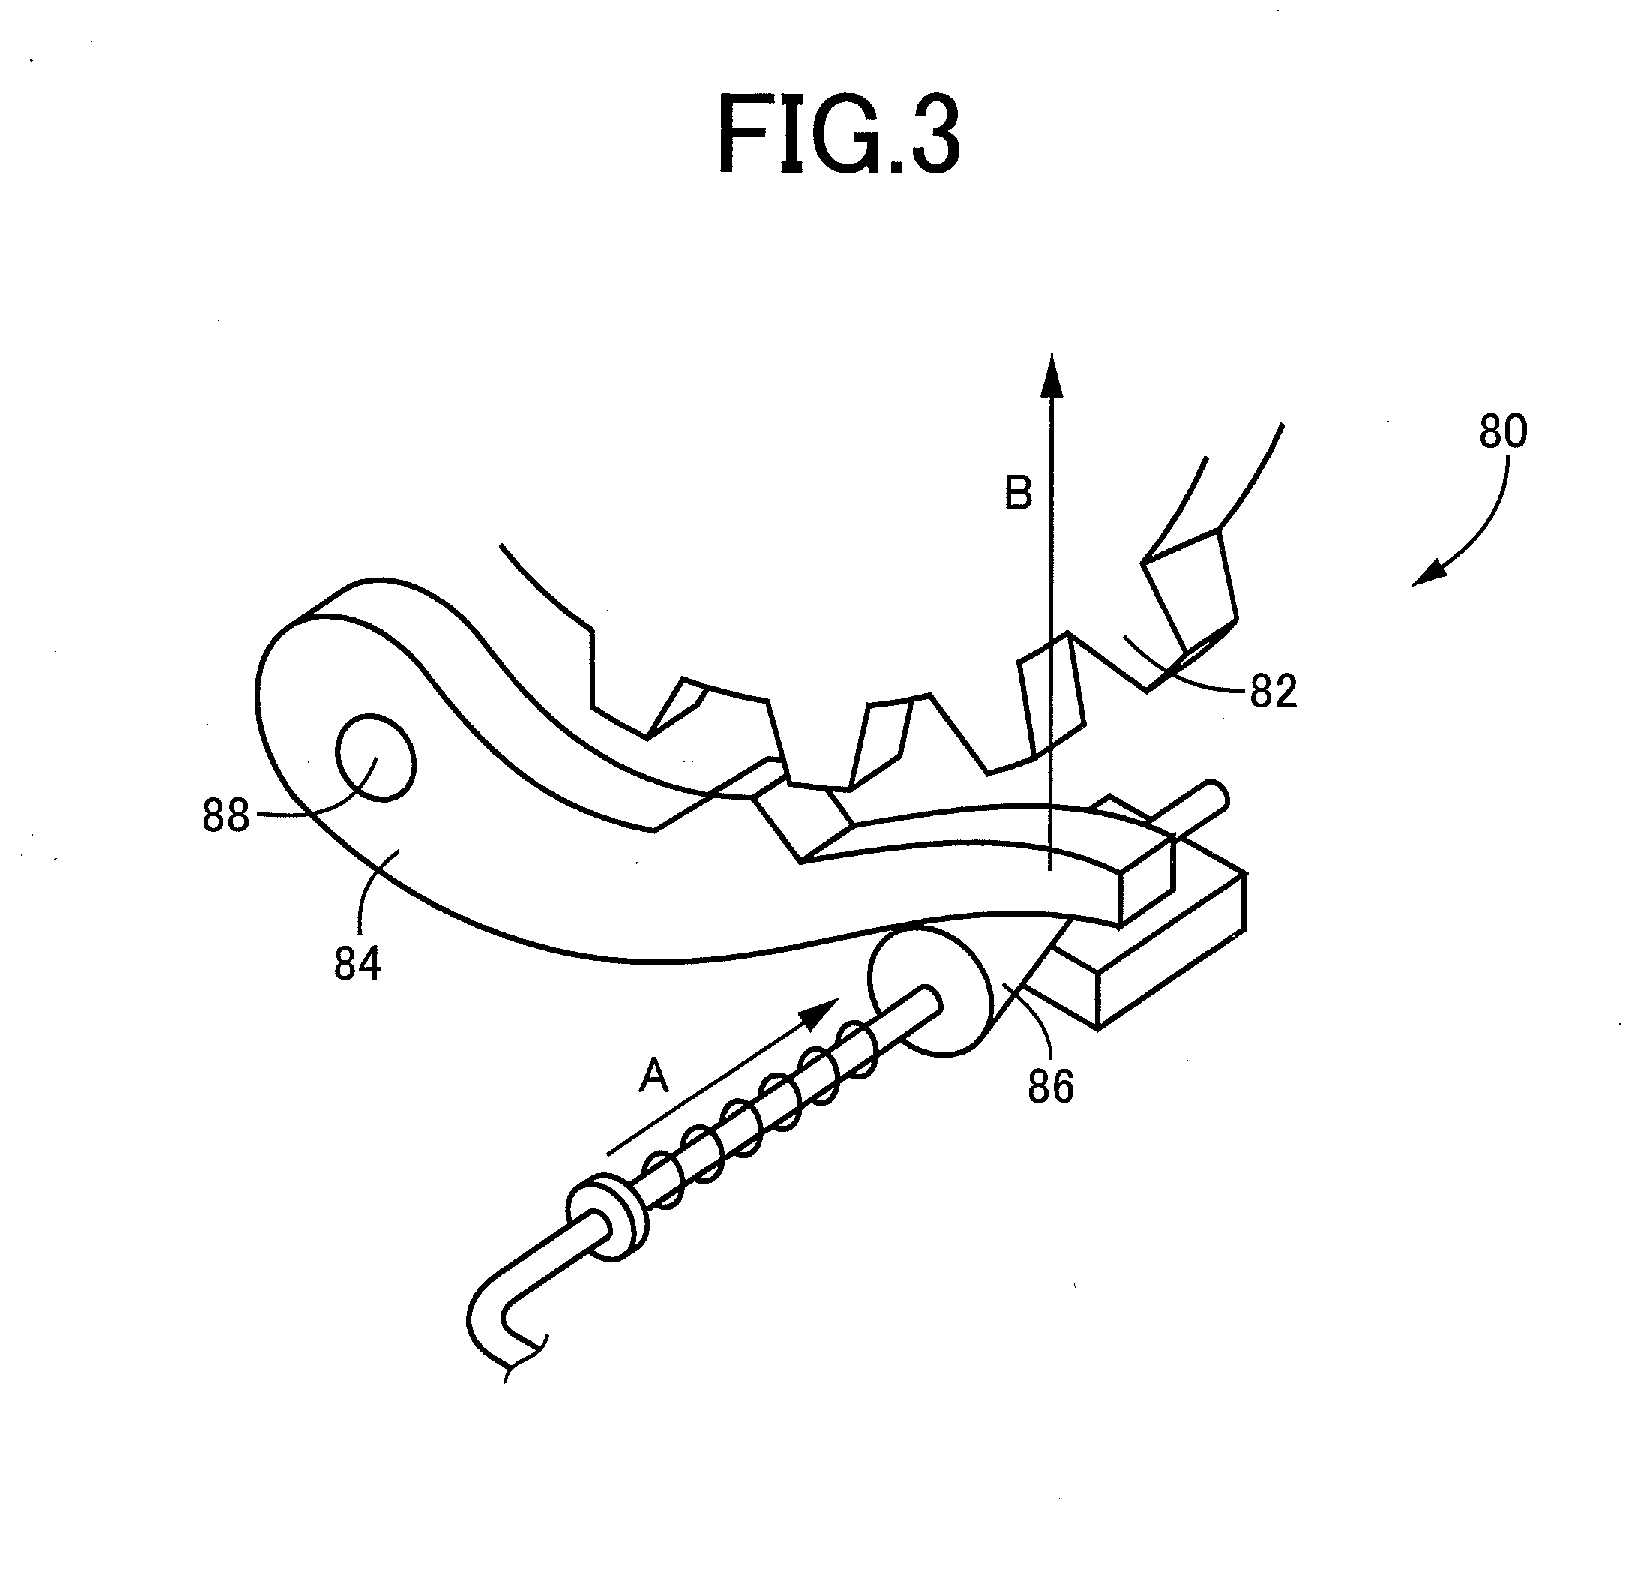 Power transmitting system of a vehicle